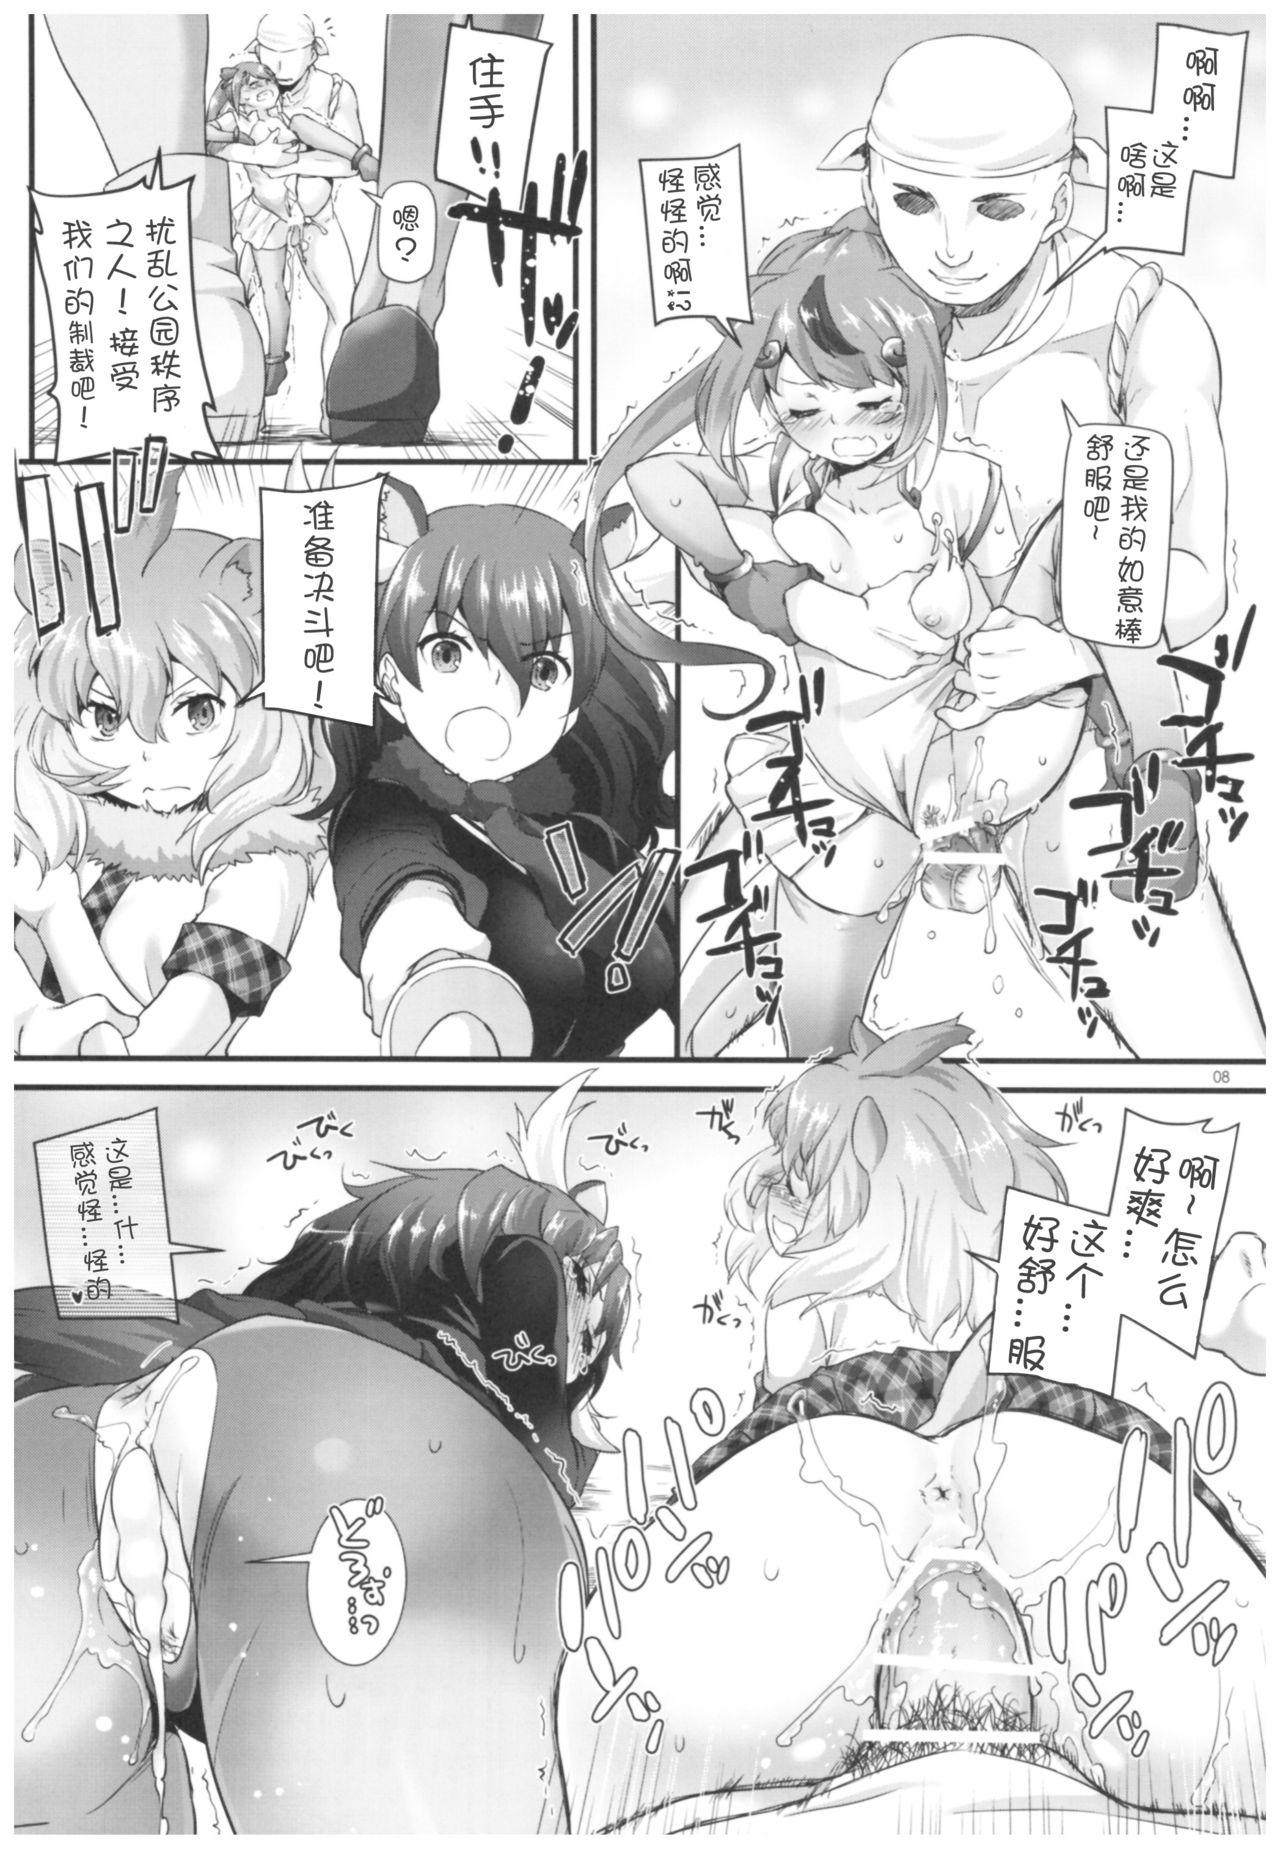 Gay Orgy D.L. action 115 - Kemono friends Pretty - Page 7